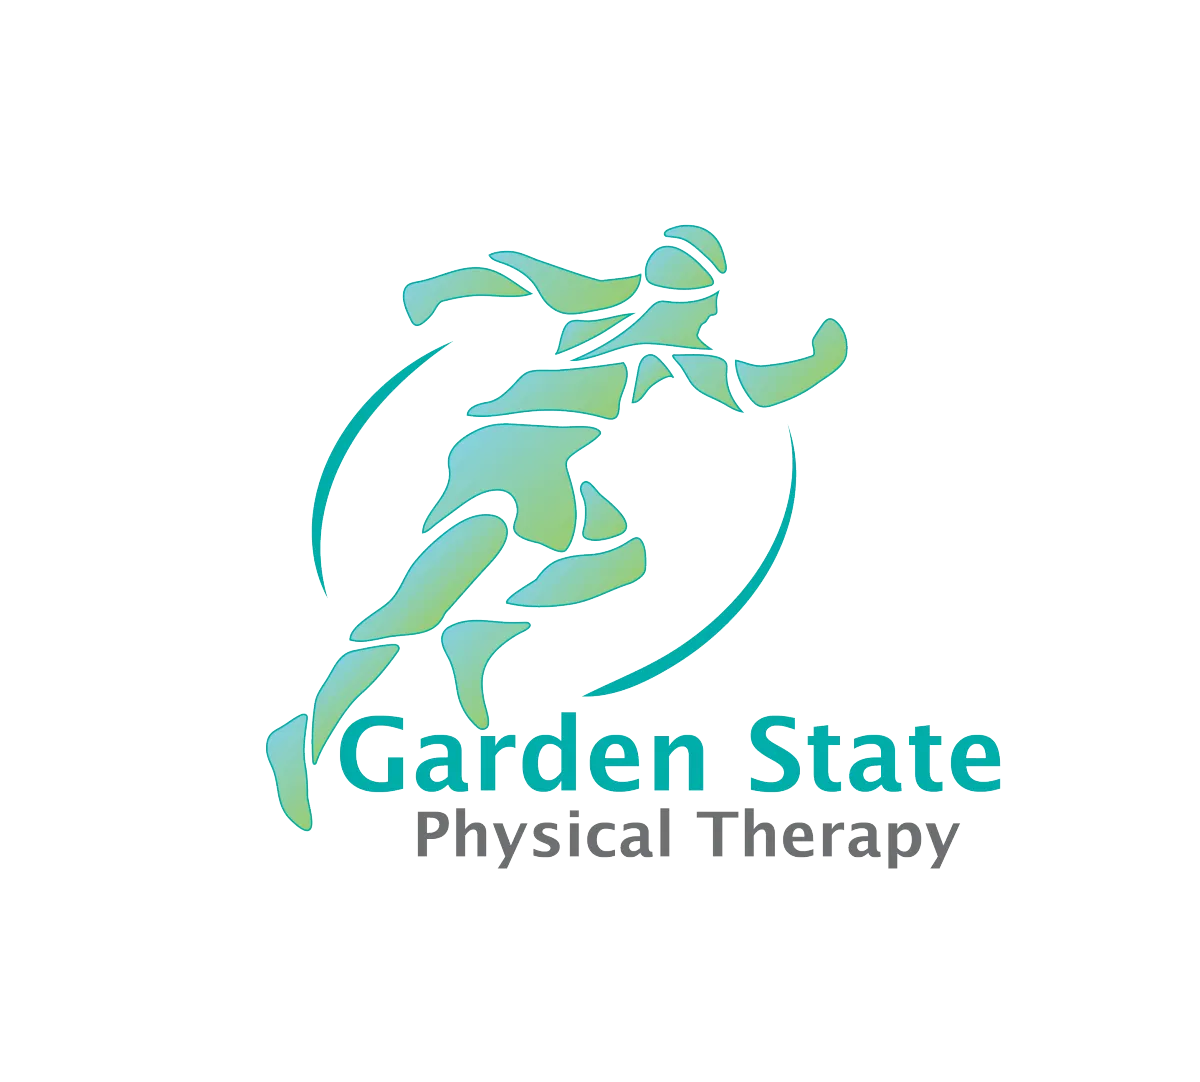 Physical Therapy, Physical Therapy hillsborough